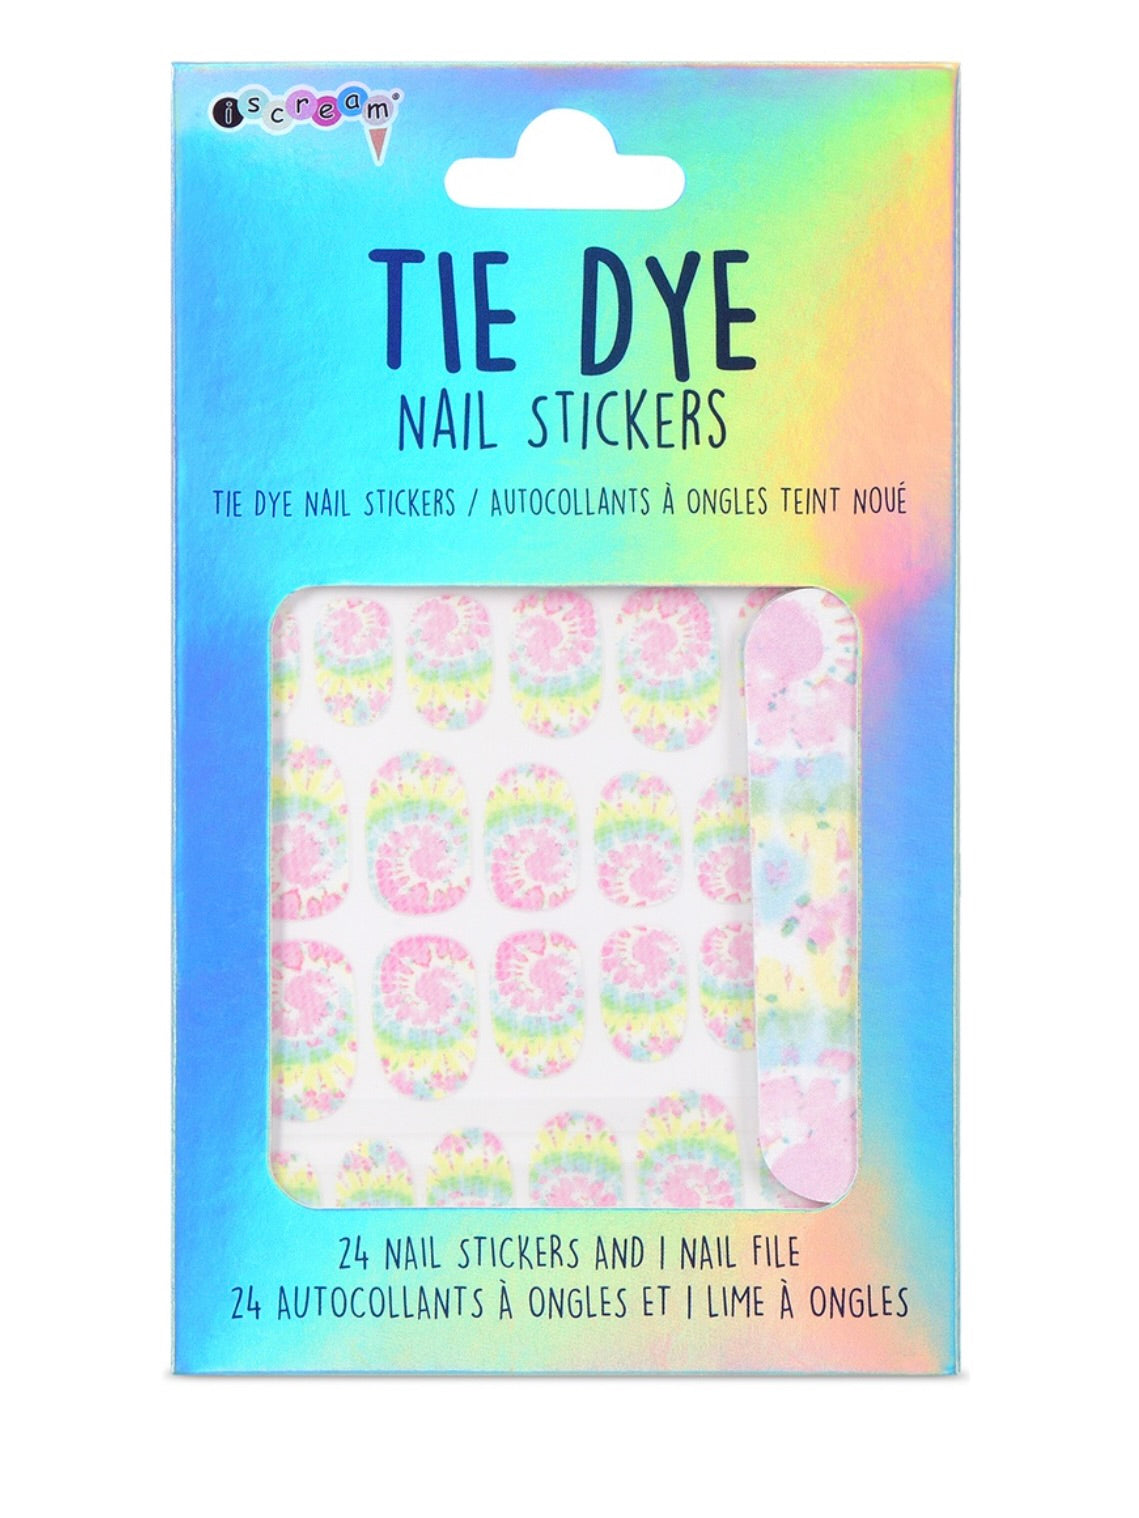 Tie Dye Nail Stickers and Nail File